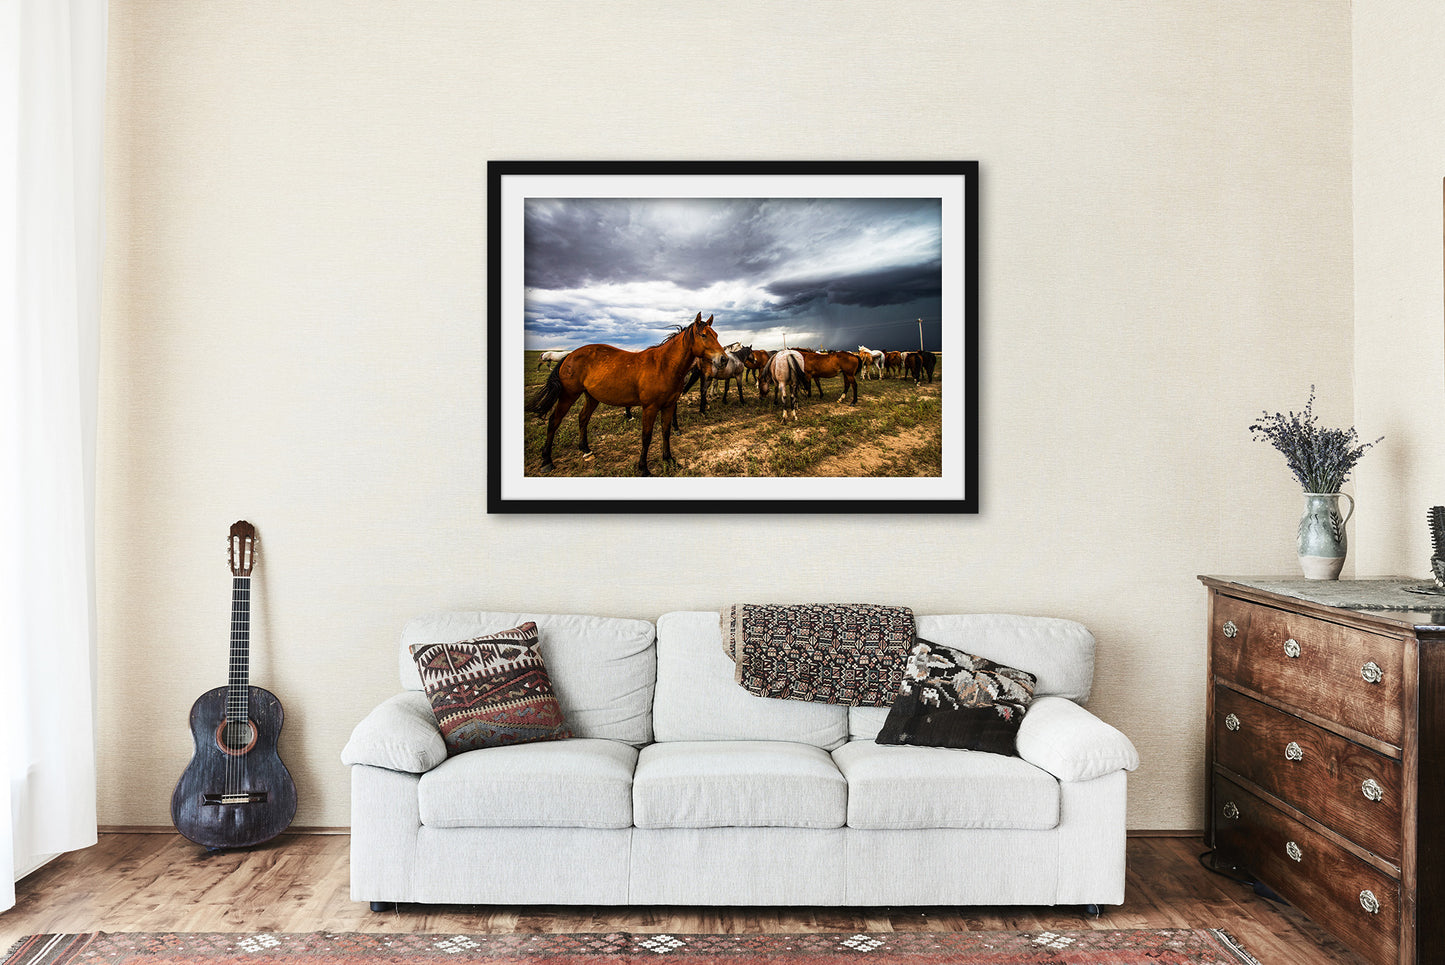 Framed and Matted Print - Picture of Horse Watching Over Herd as Storm Approaches on Spring Day in Oklahoma Equine Wall Art Western Decor